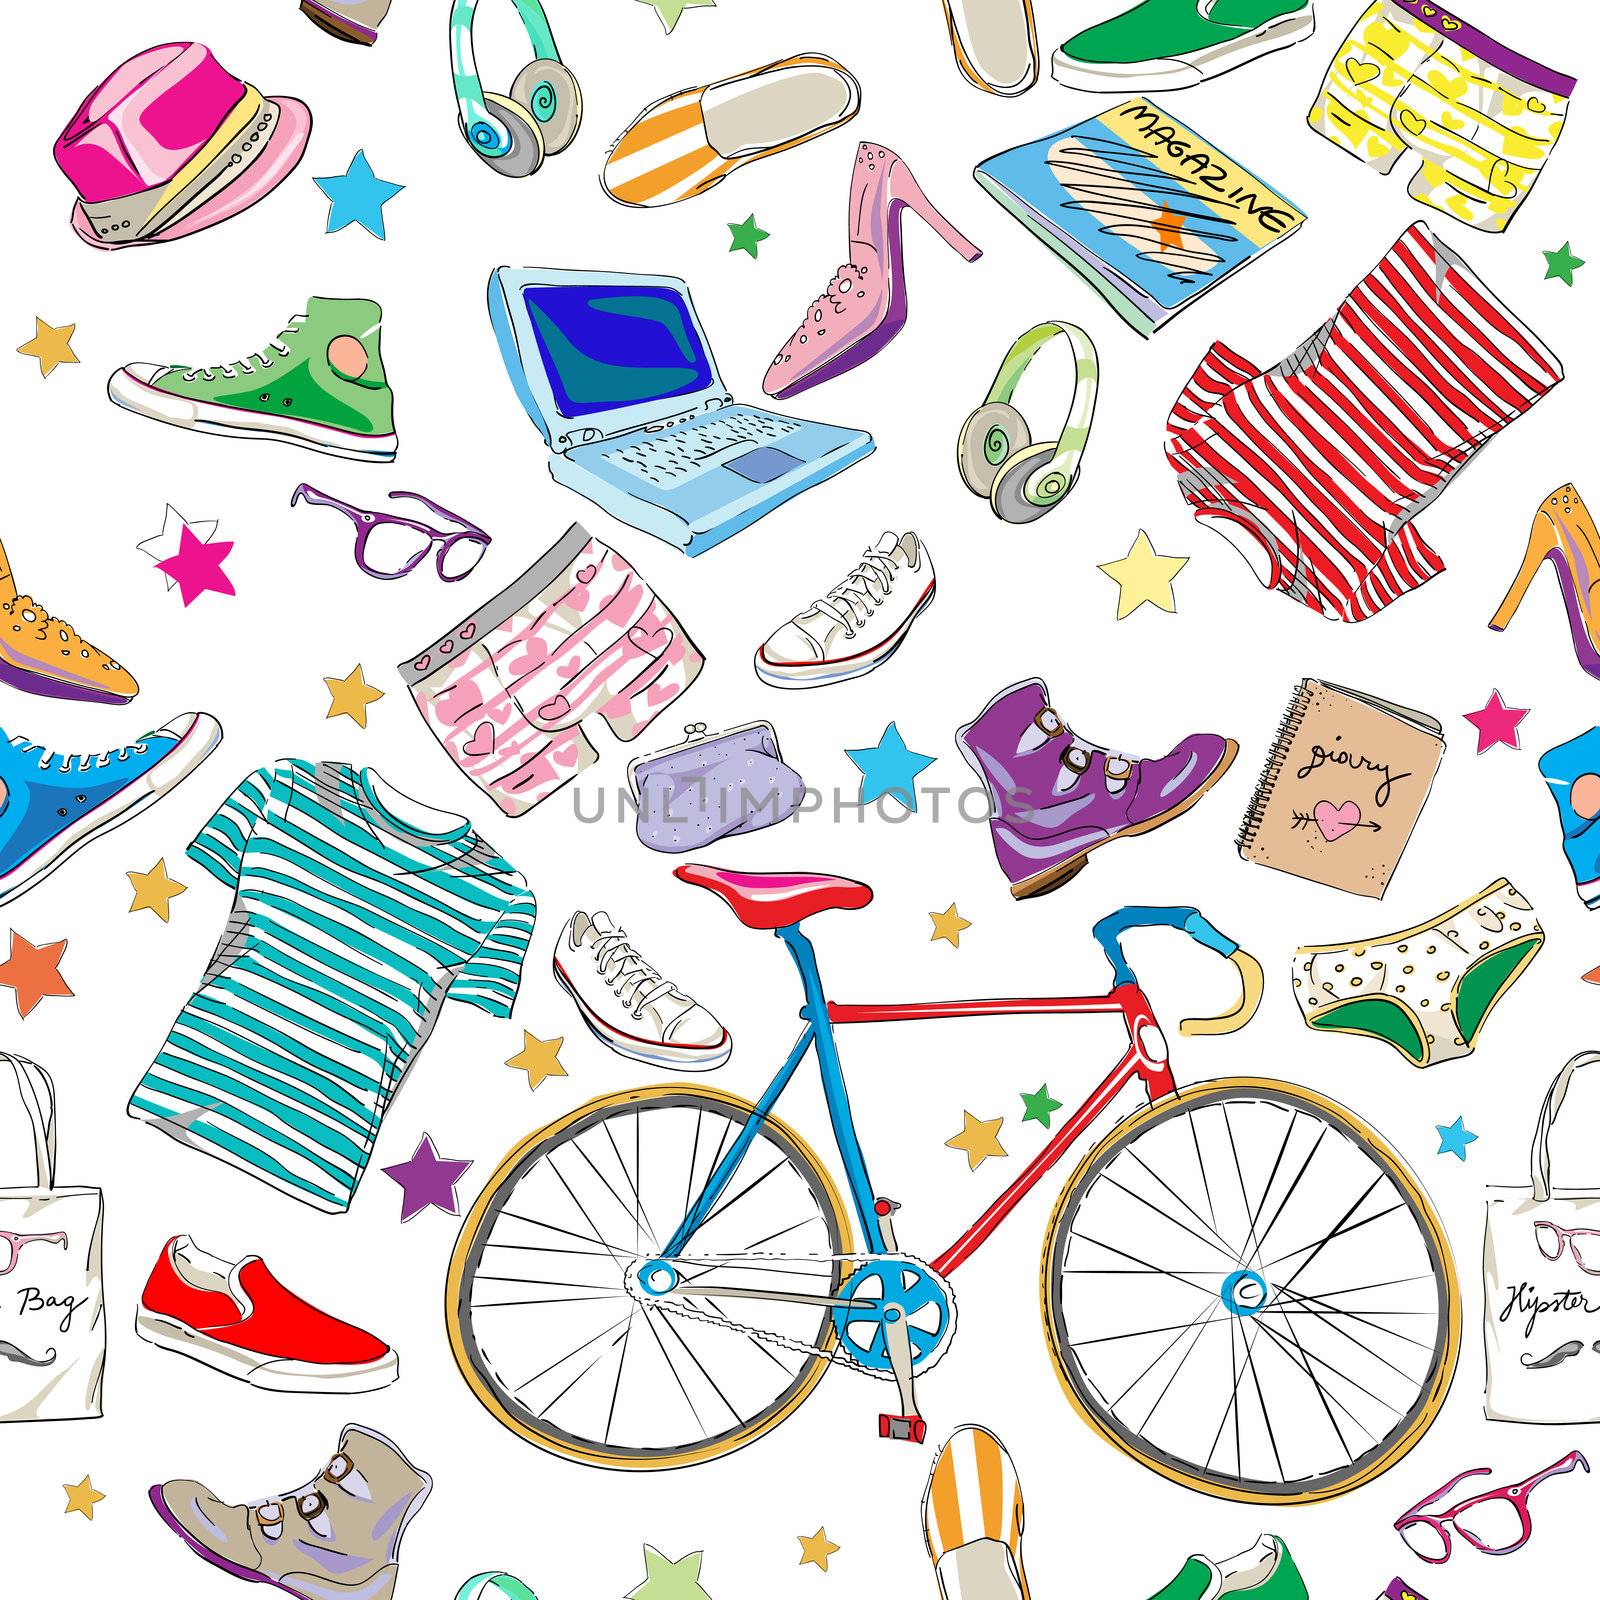 urban hipster accesories pattern, smart colored doodles over white